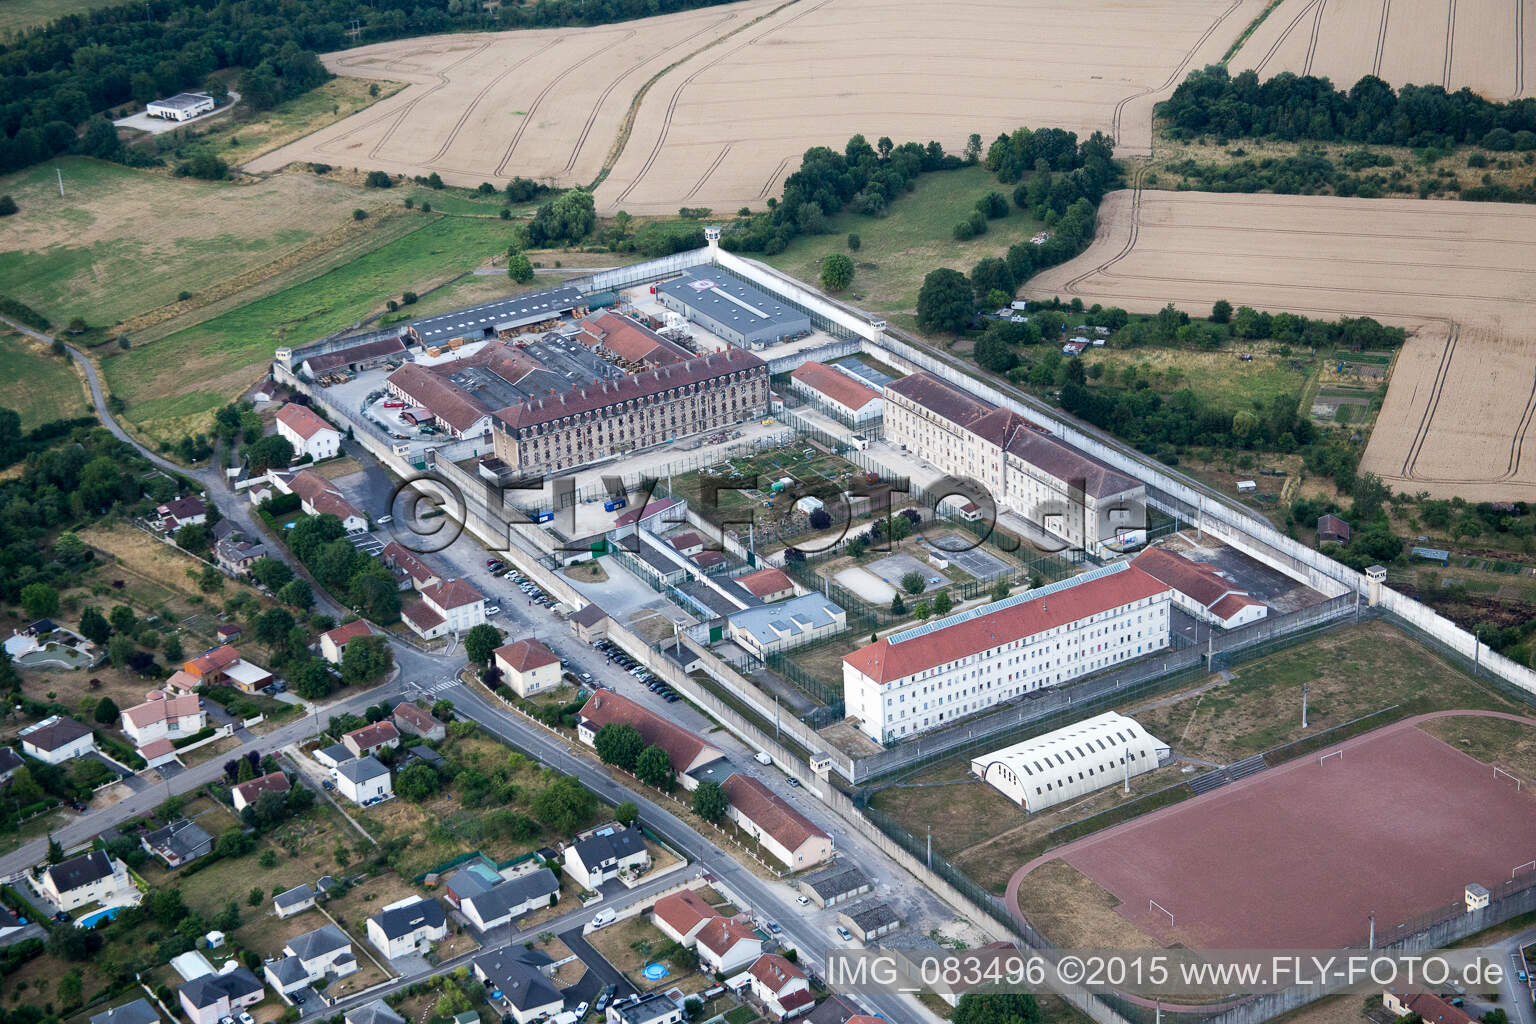 Building complex of the French army - military barracks of the 516th railway Regiment in Ecrouves in Grand Est, France